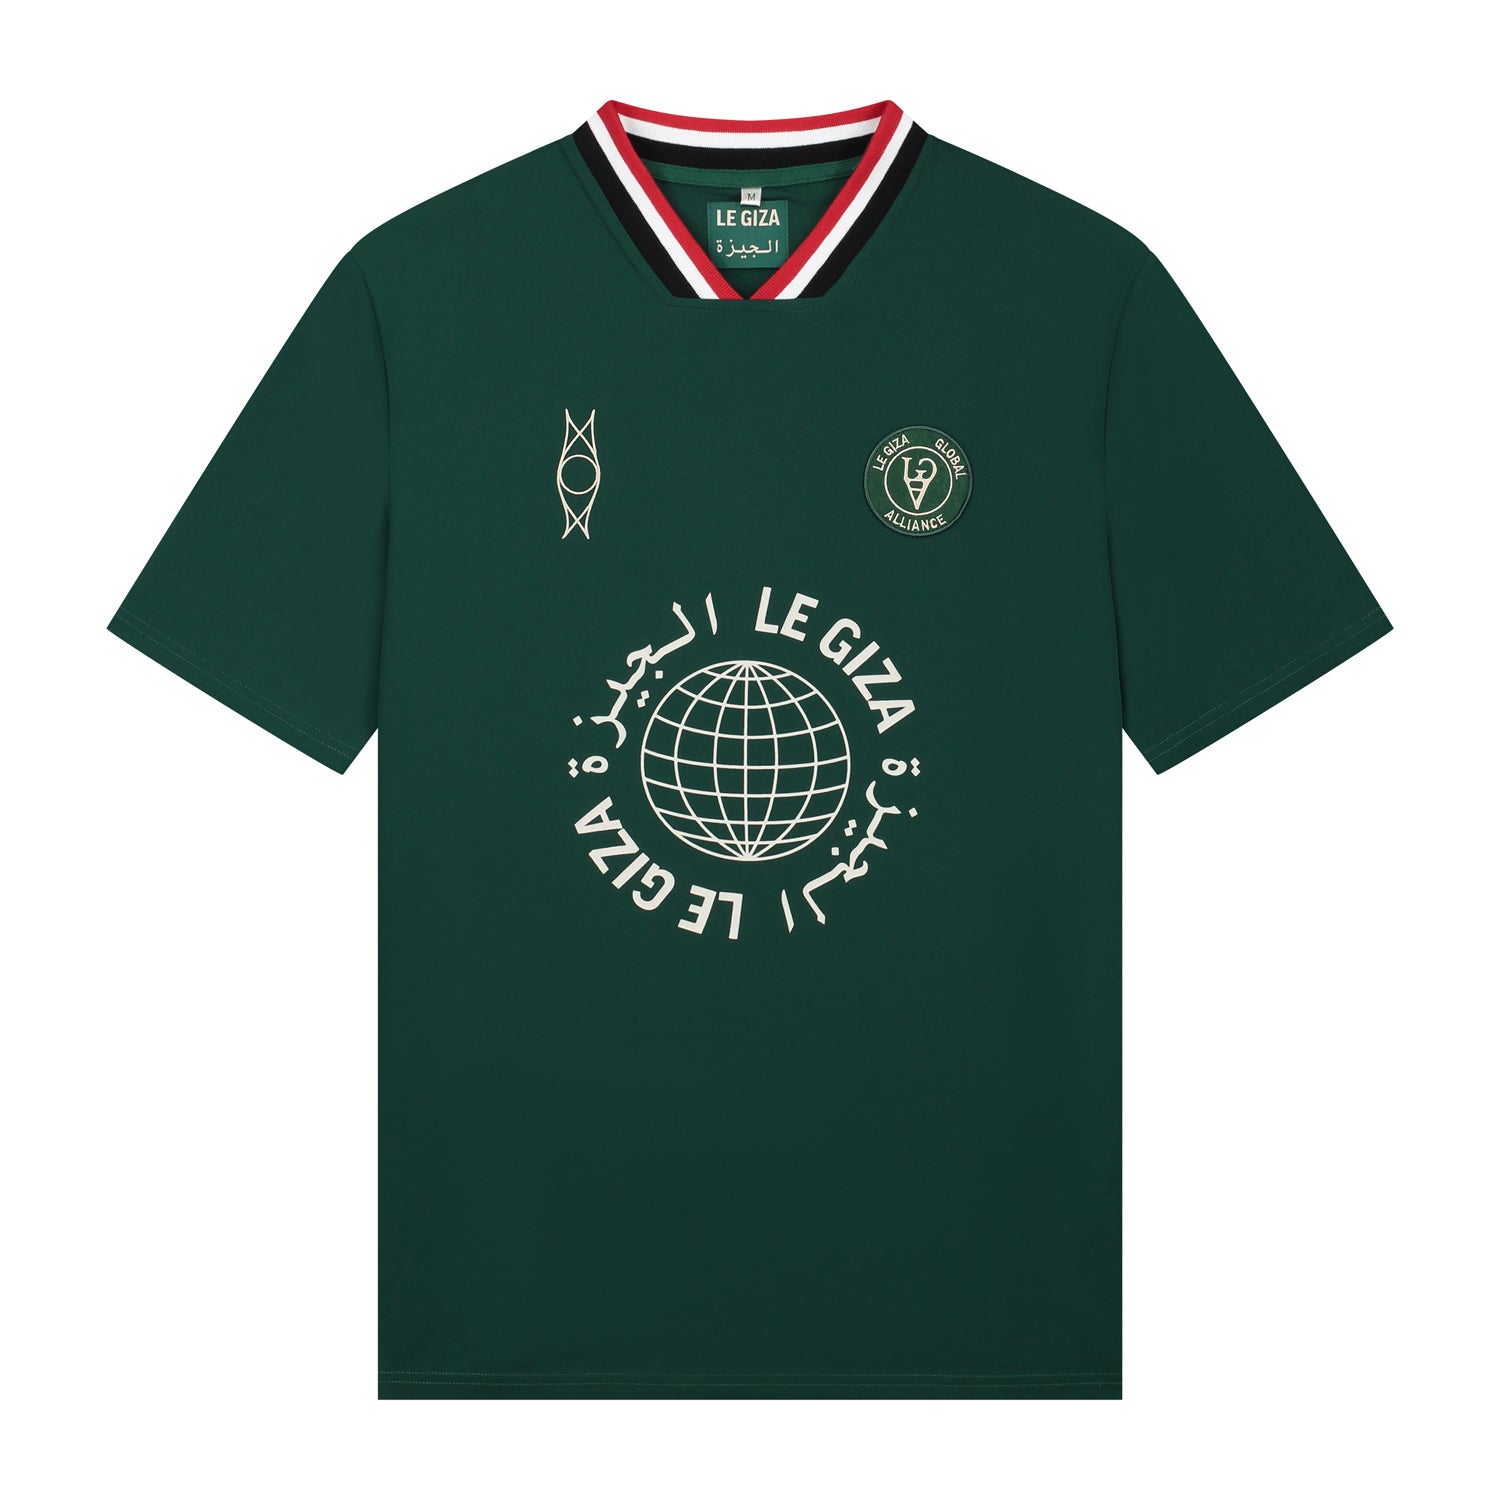 Front view of the Dark Green Le Giza Football Jersey with hieroglyphic embroidery and Le Giza Global logo.